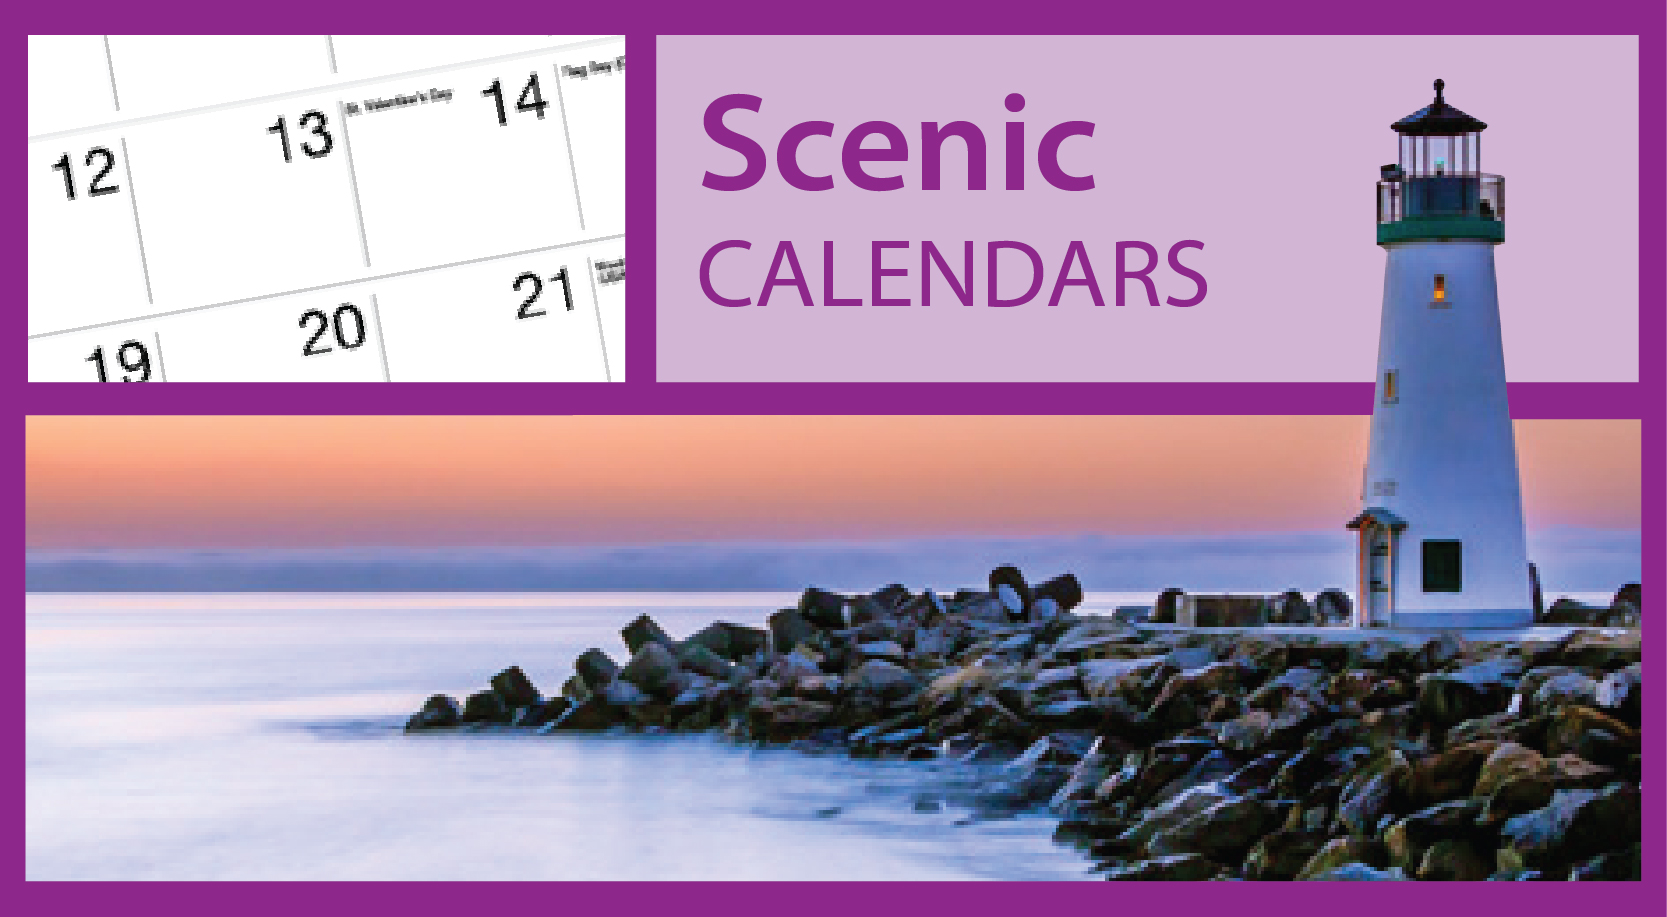 Promotional Scenic Calendars https://www.valuecalendars.com/products/standard_imprinted_calendars/promotional_scenic_calendars